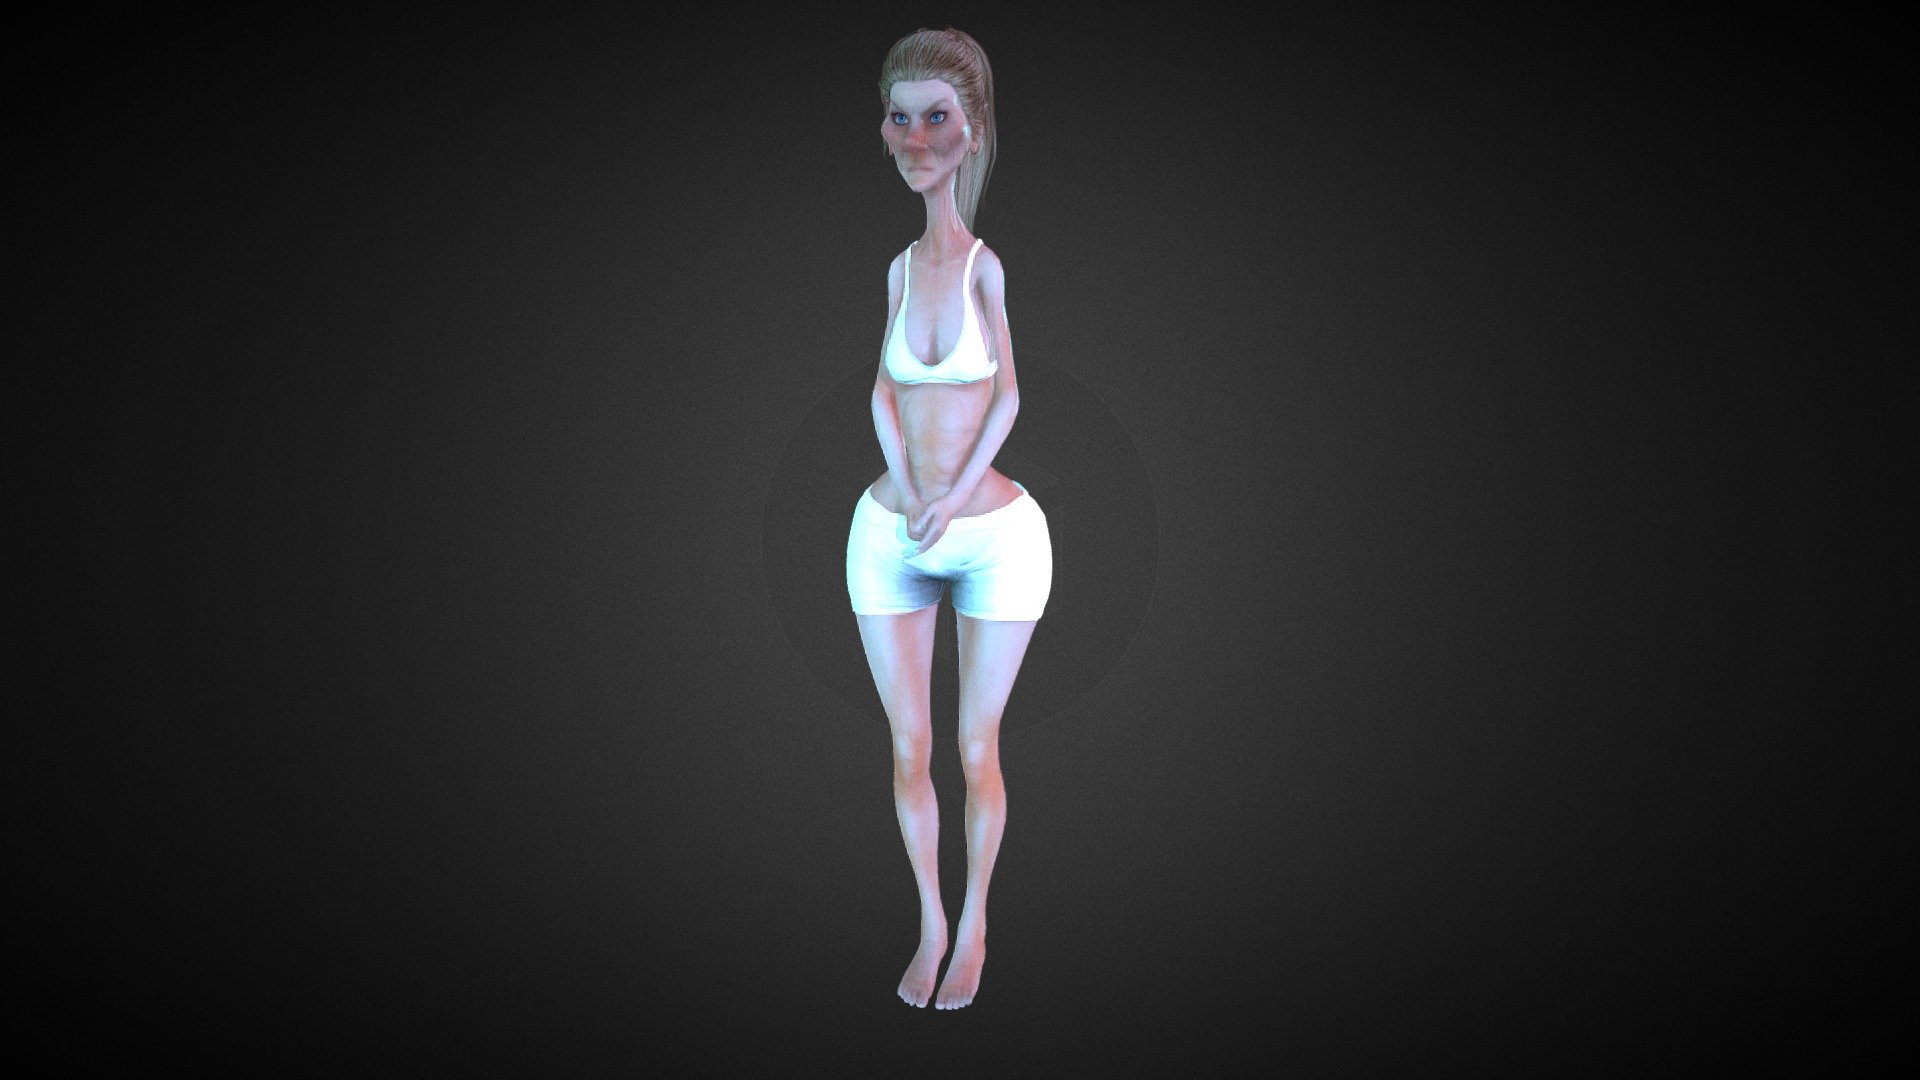 CC Anne Morph from my OLDIES character pack. Check out all my CC character morphs here:

https://www.reallusion.com/contentstore/featureddeveloper/profile/#!/ToKoMotion/Character%20Creator - iClone Character Creator - Anne Morph - 3D model by ToKoMotion 3d model